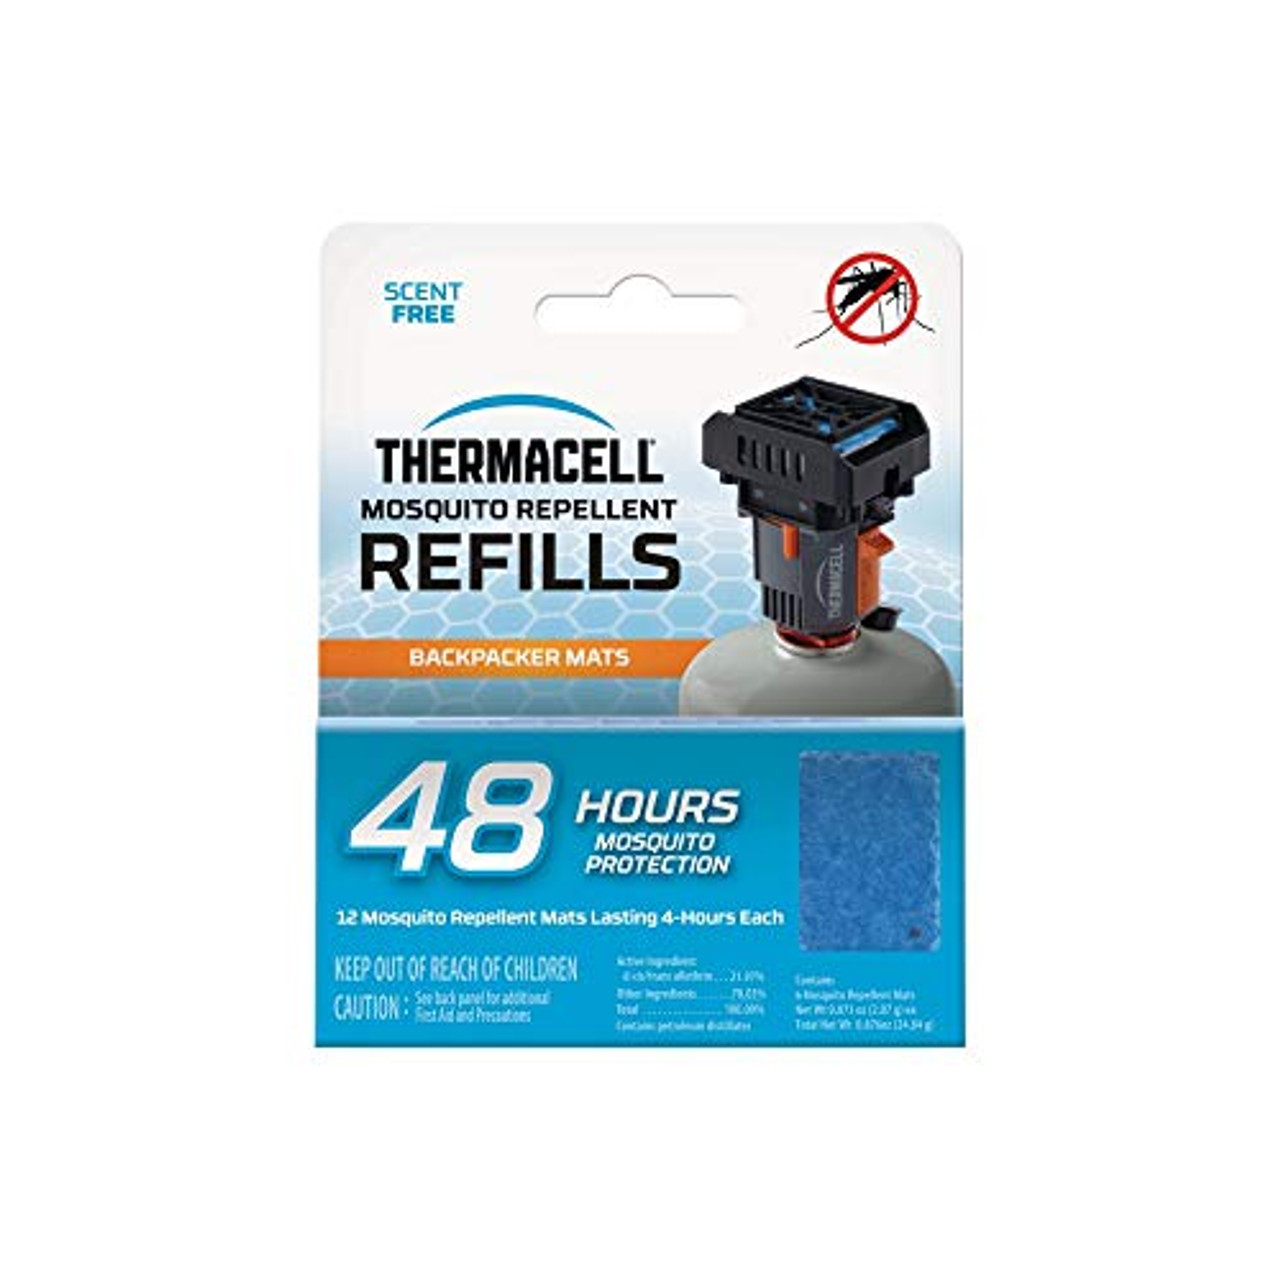 Thermacell Backpacker Mat Only Refill - 48 Hour